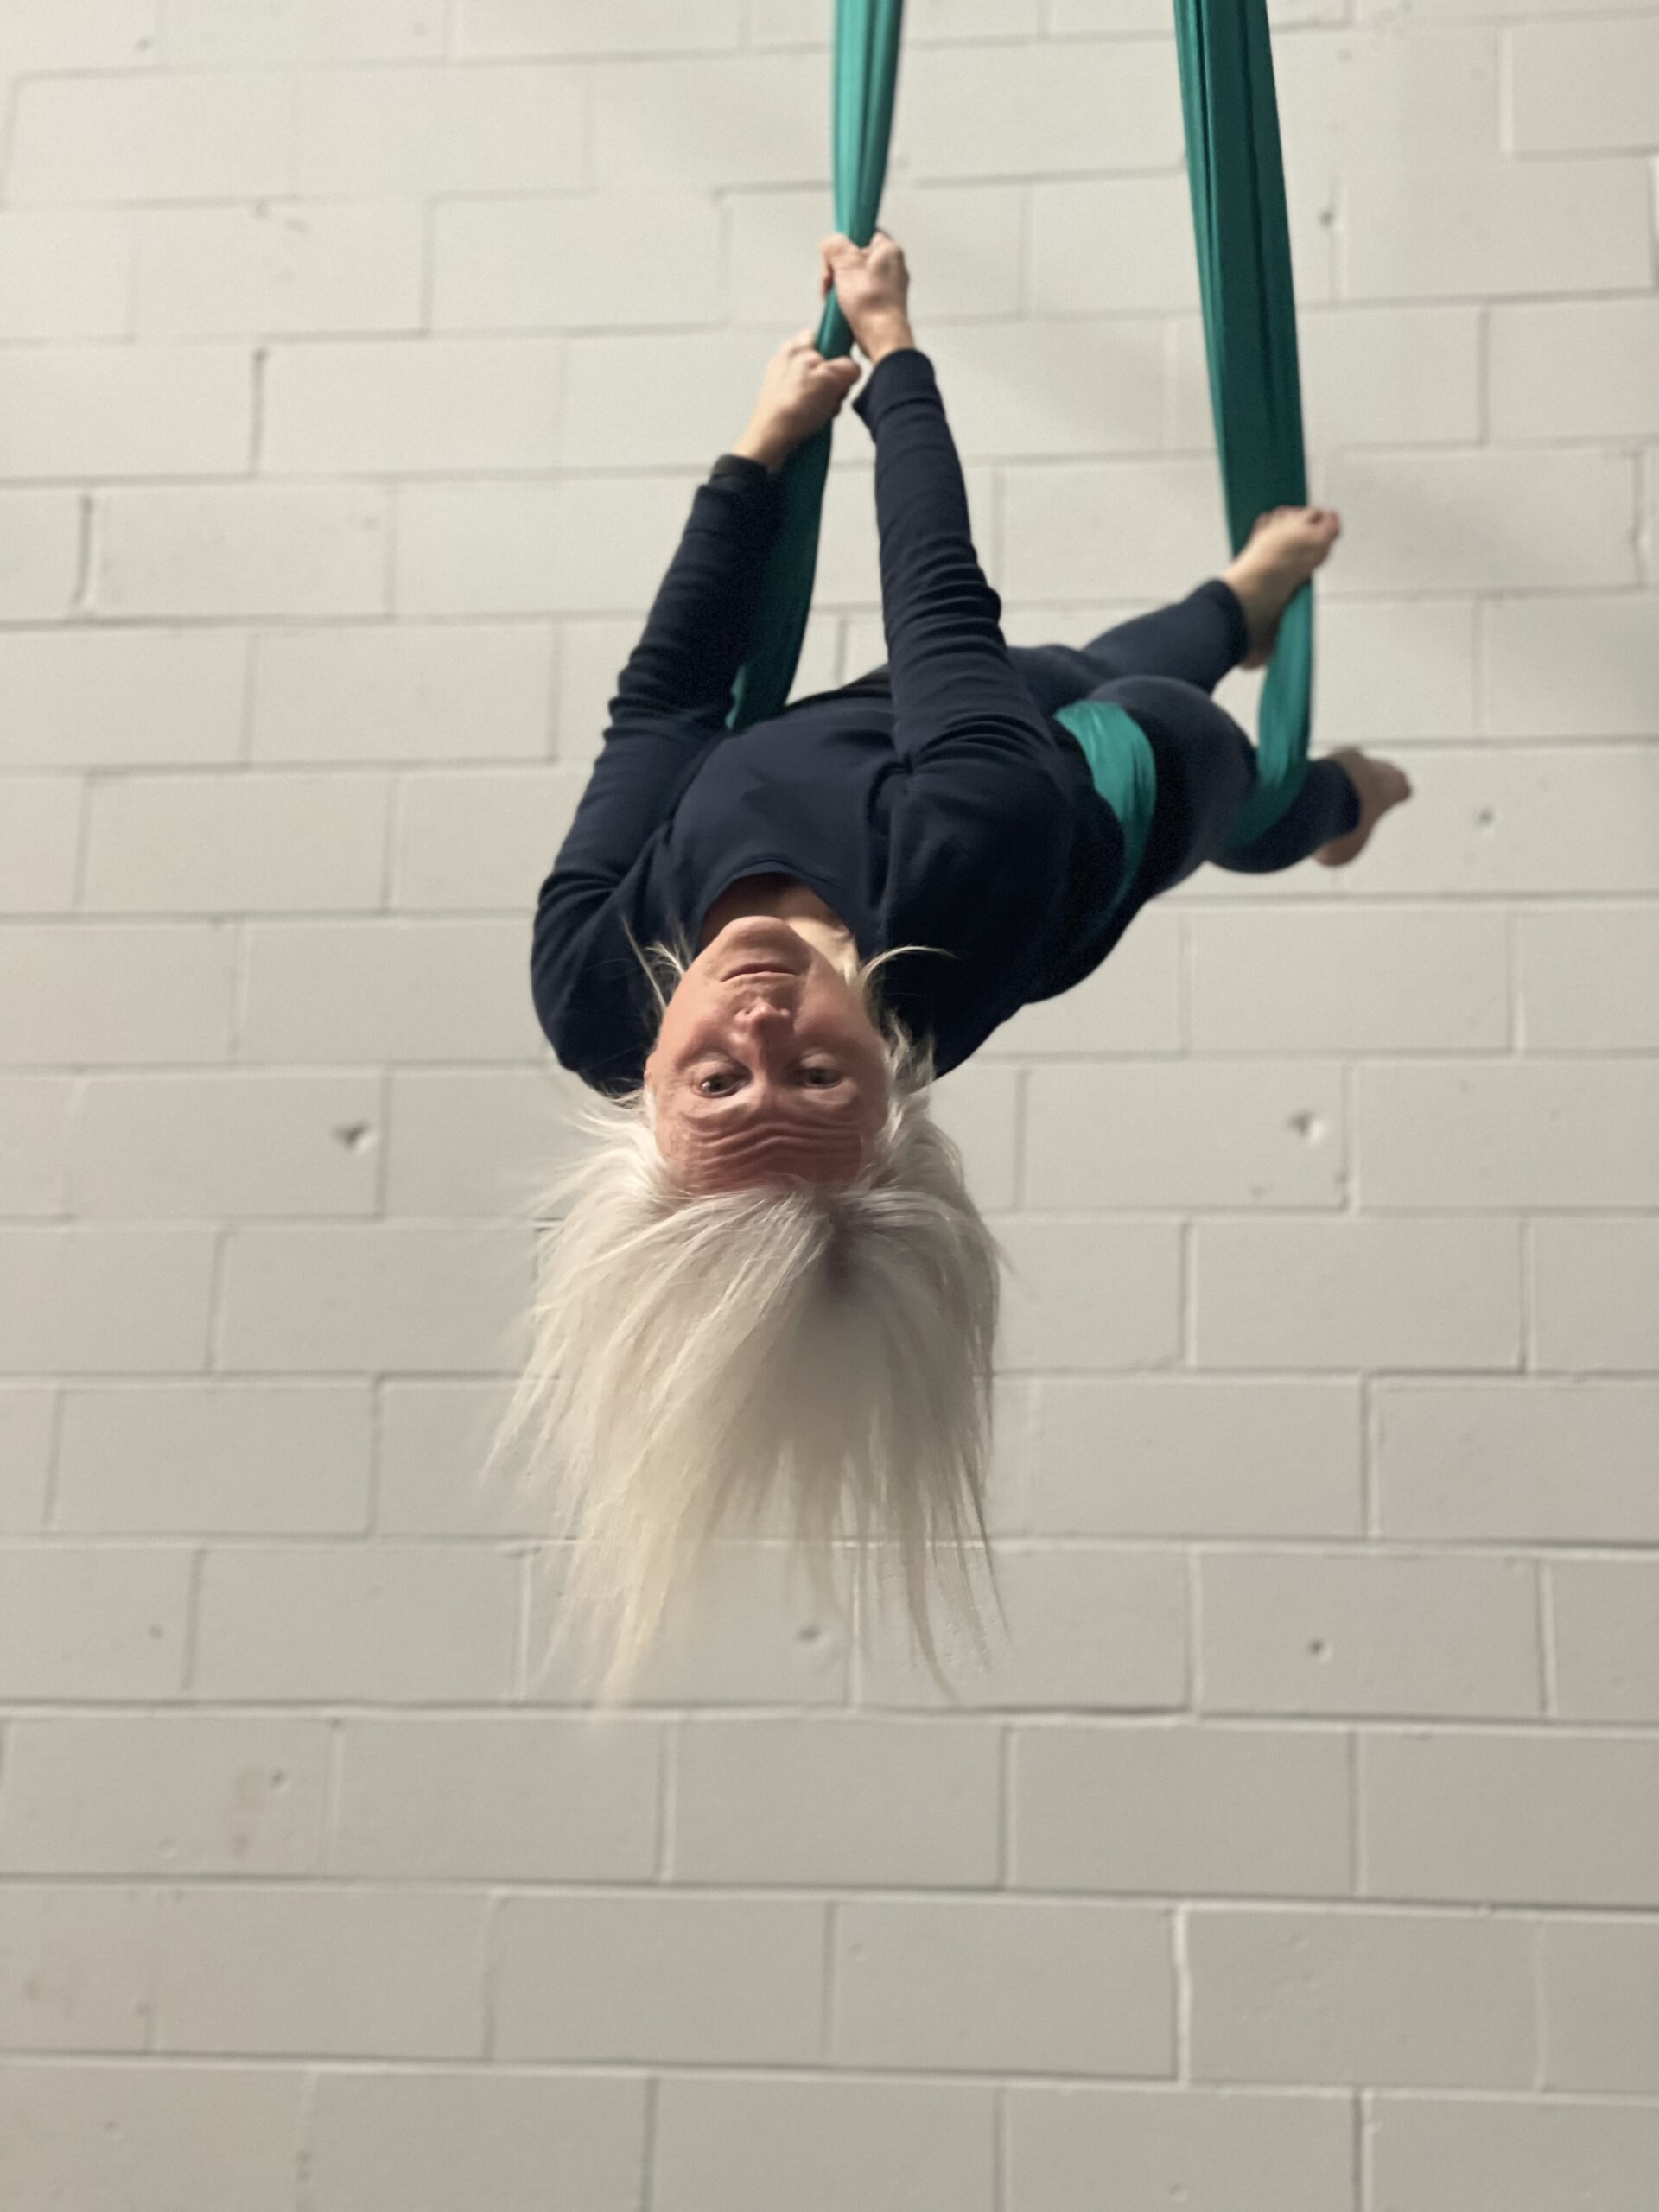 Kathleen, a white woman with silver hair, hangs upside down in the air, wrapped in aerial fabric that is suspended from the ceiling. She is strong and fierce.